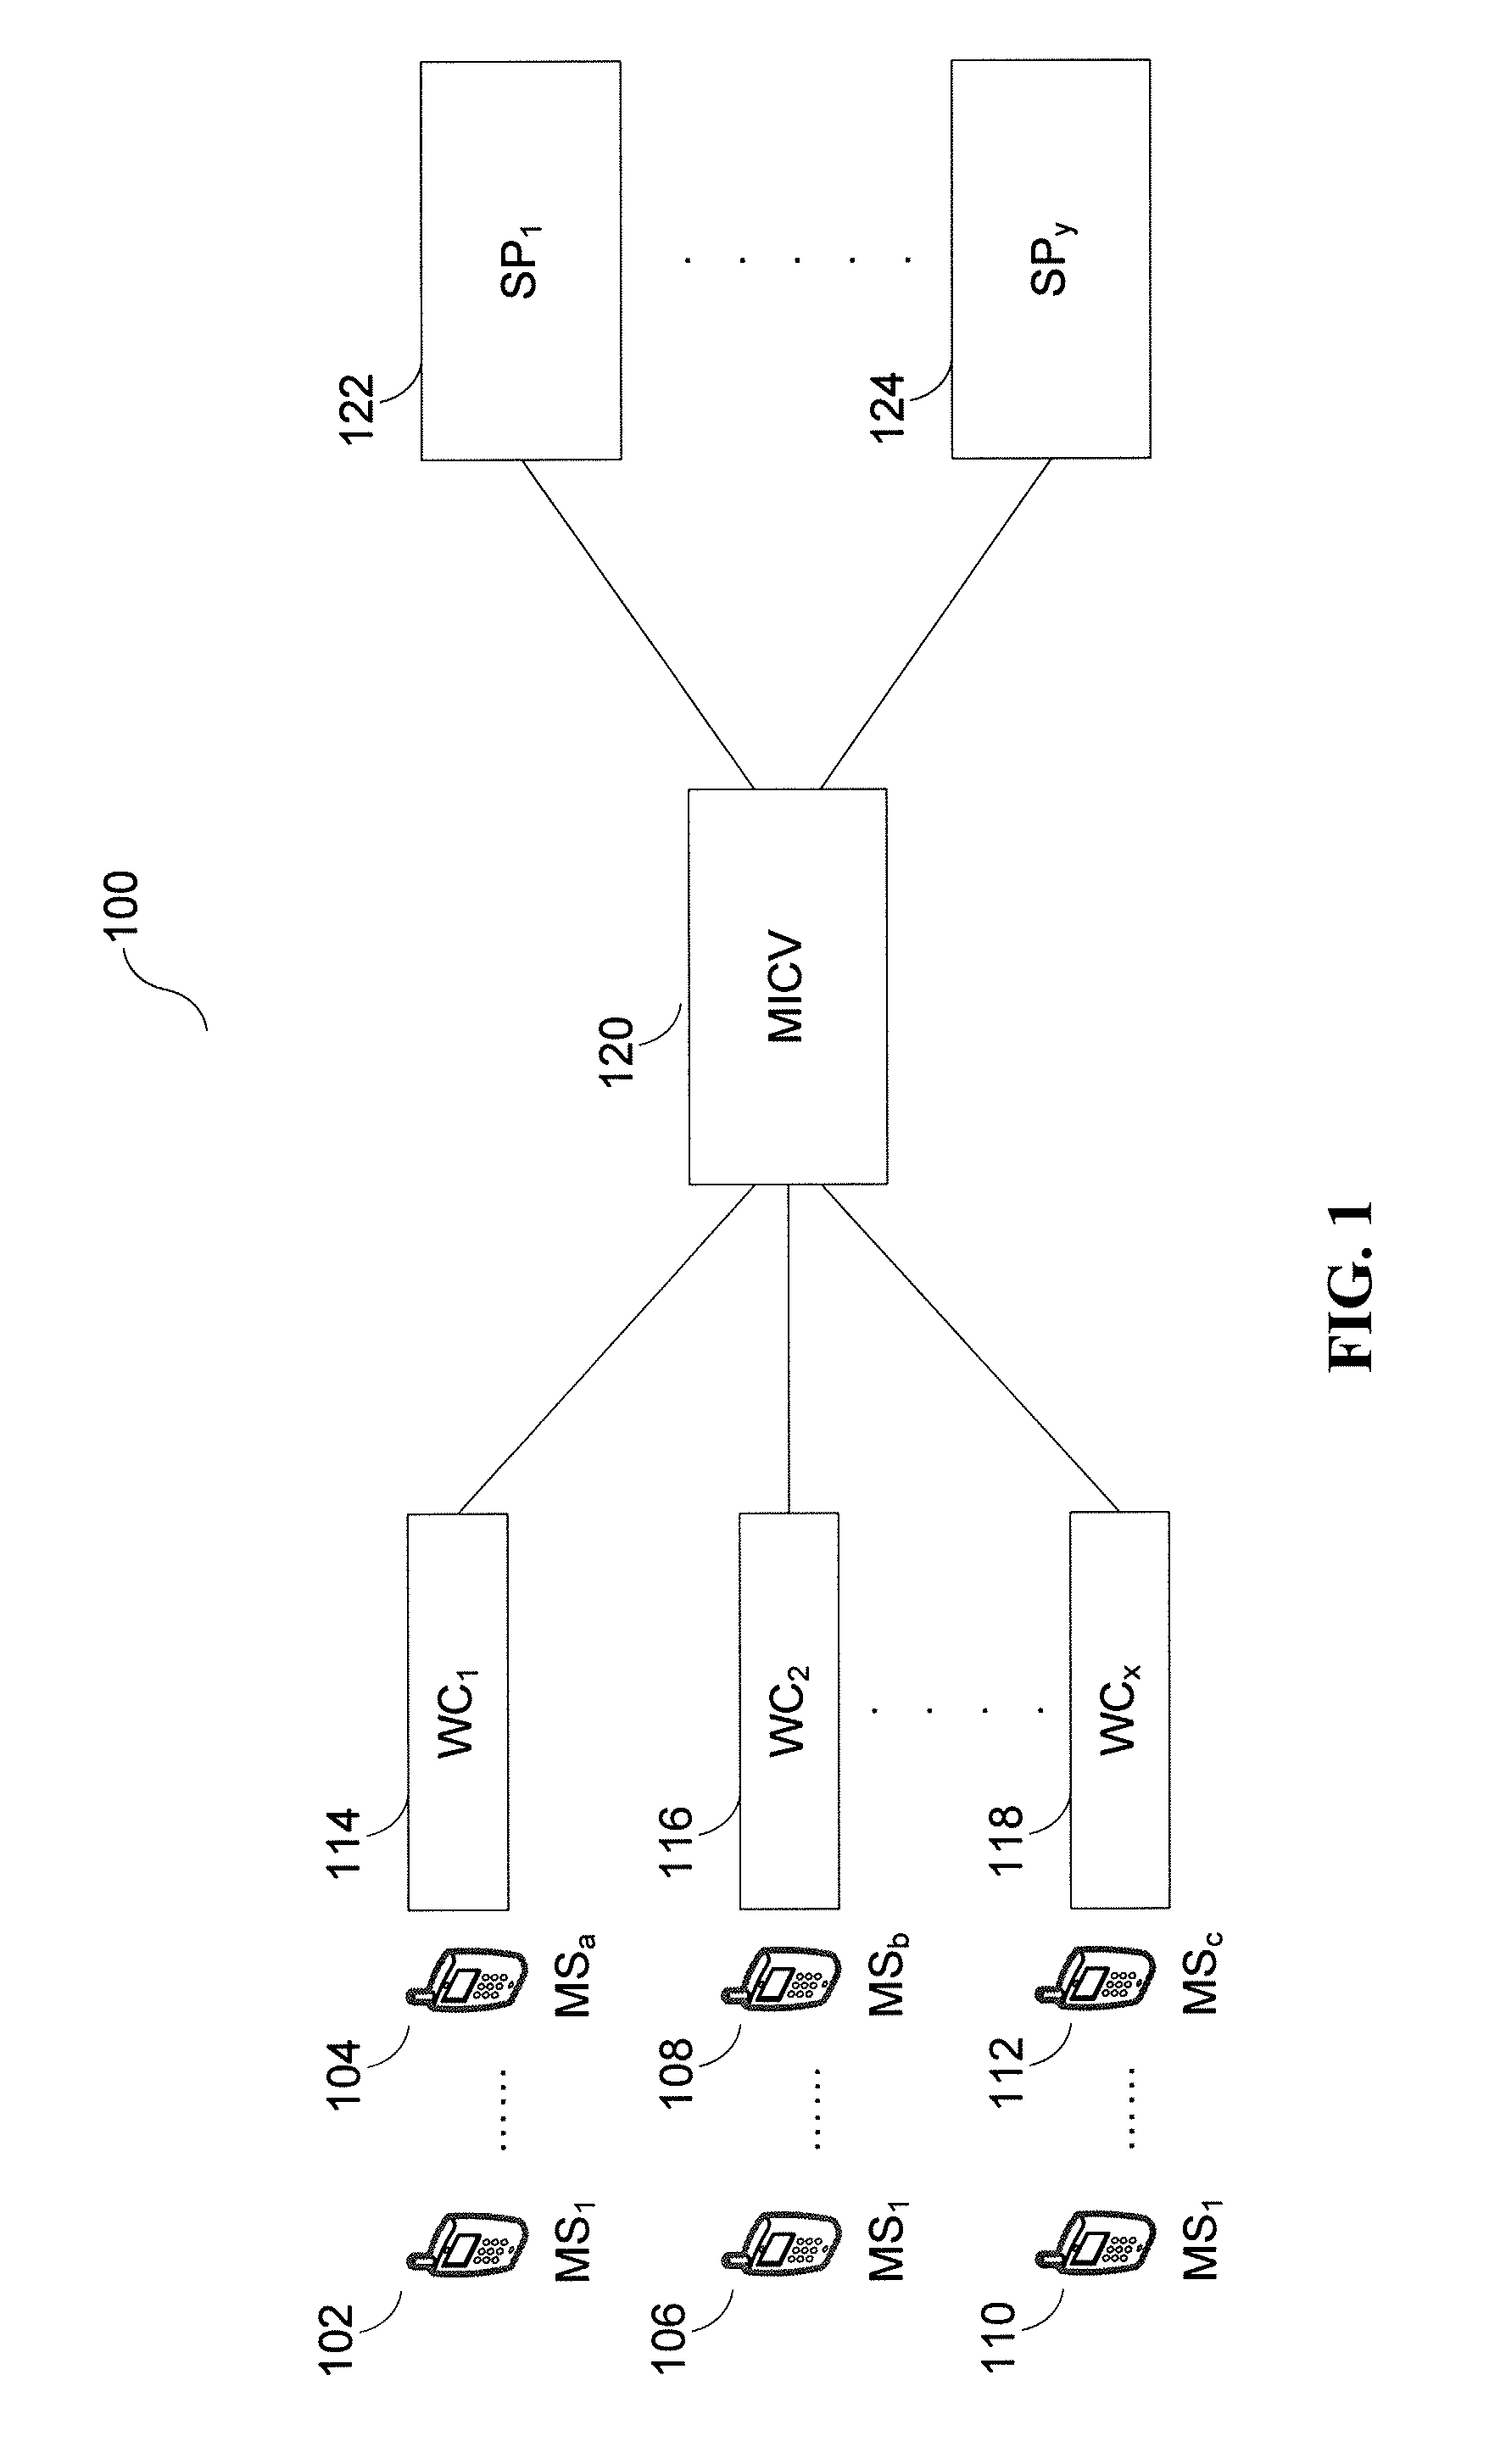 System and Method for Dynamic Spam Detection